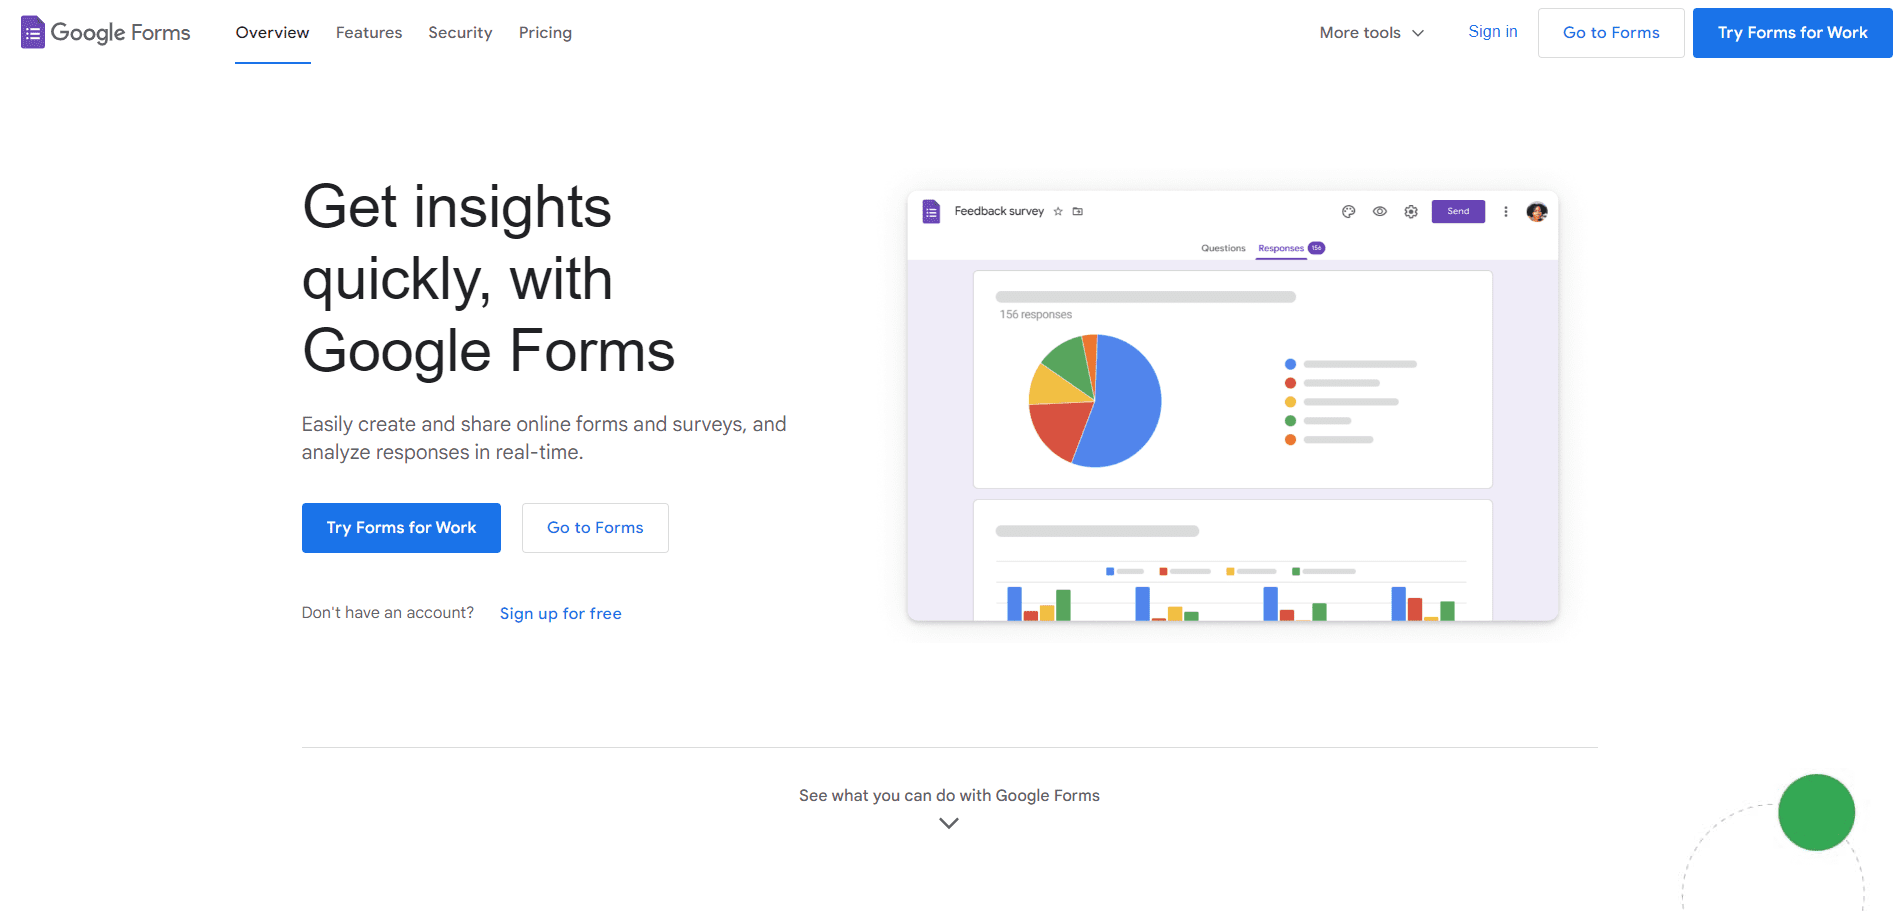 Google Forms' homepage